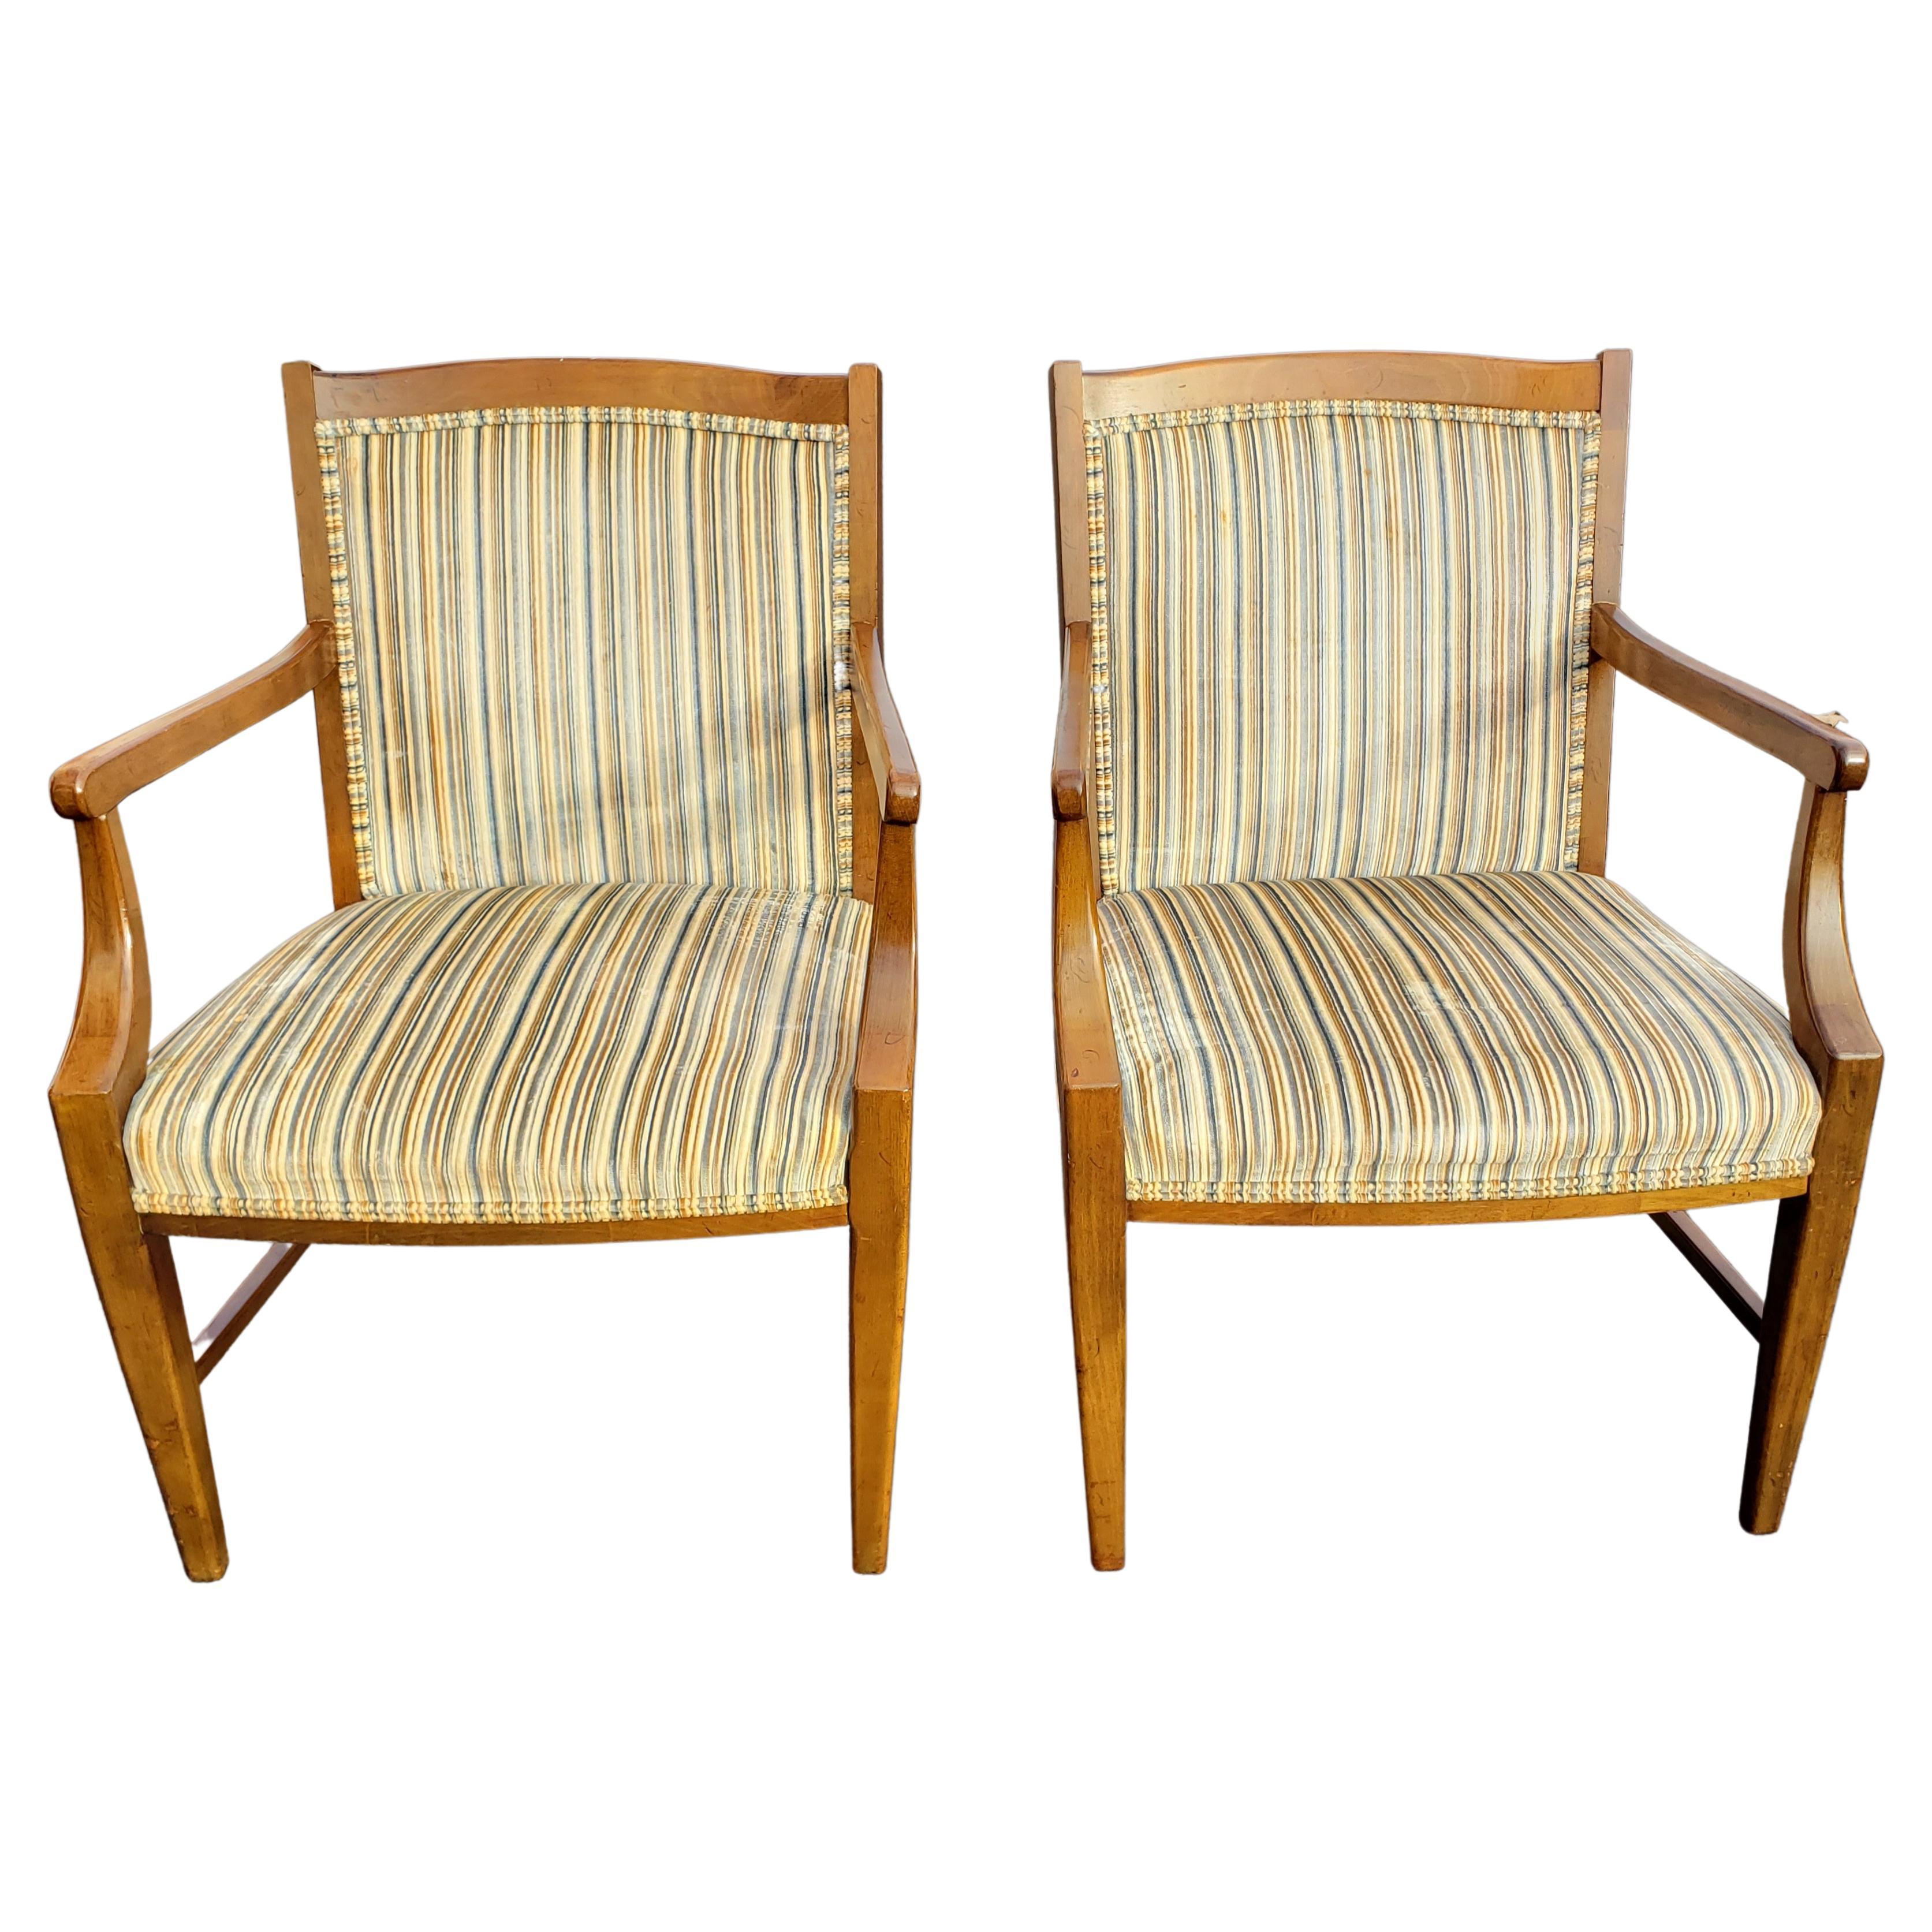 Stateville Ross Upholstered Maple Armchairs, circa 1970s, a Pair For Sale